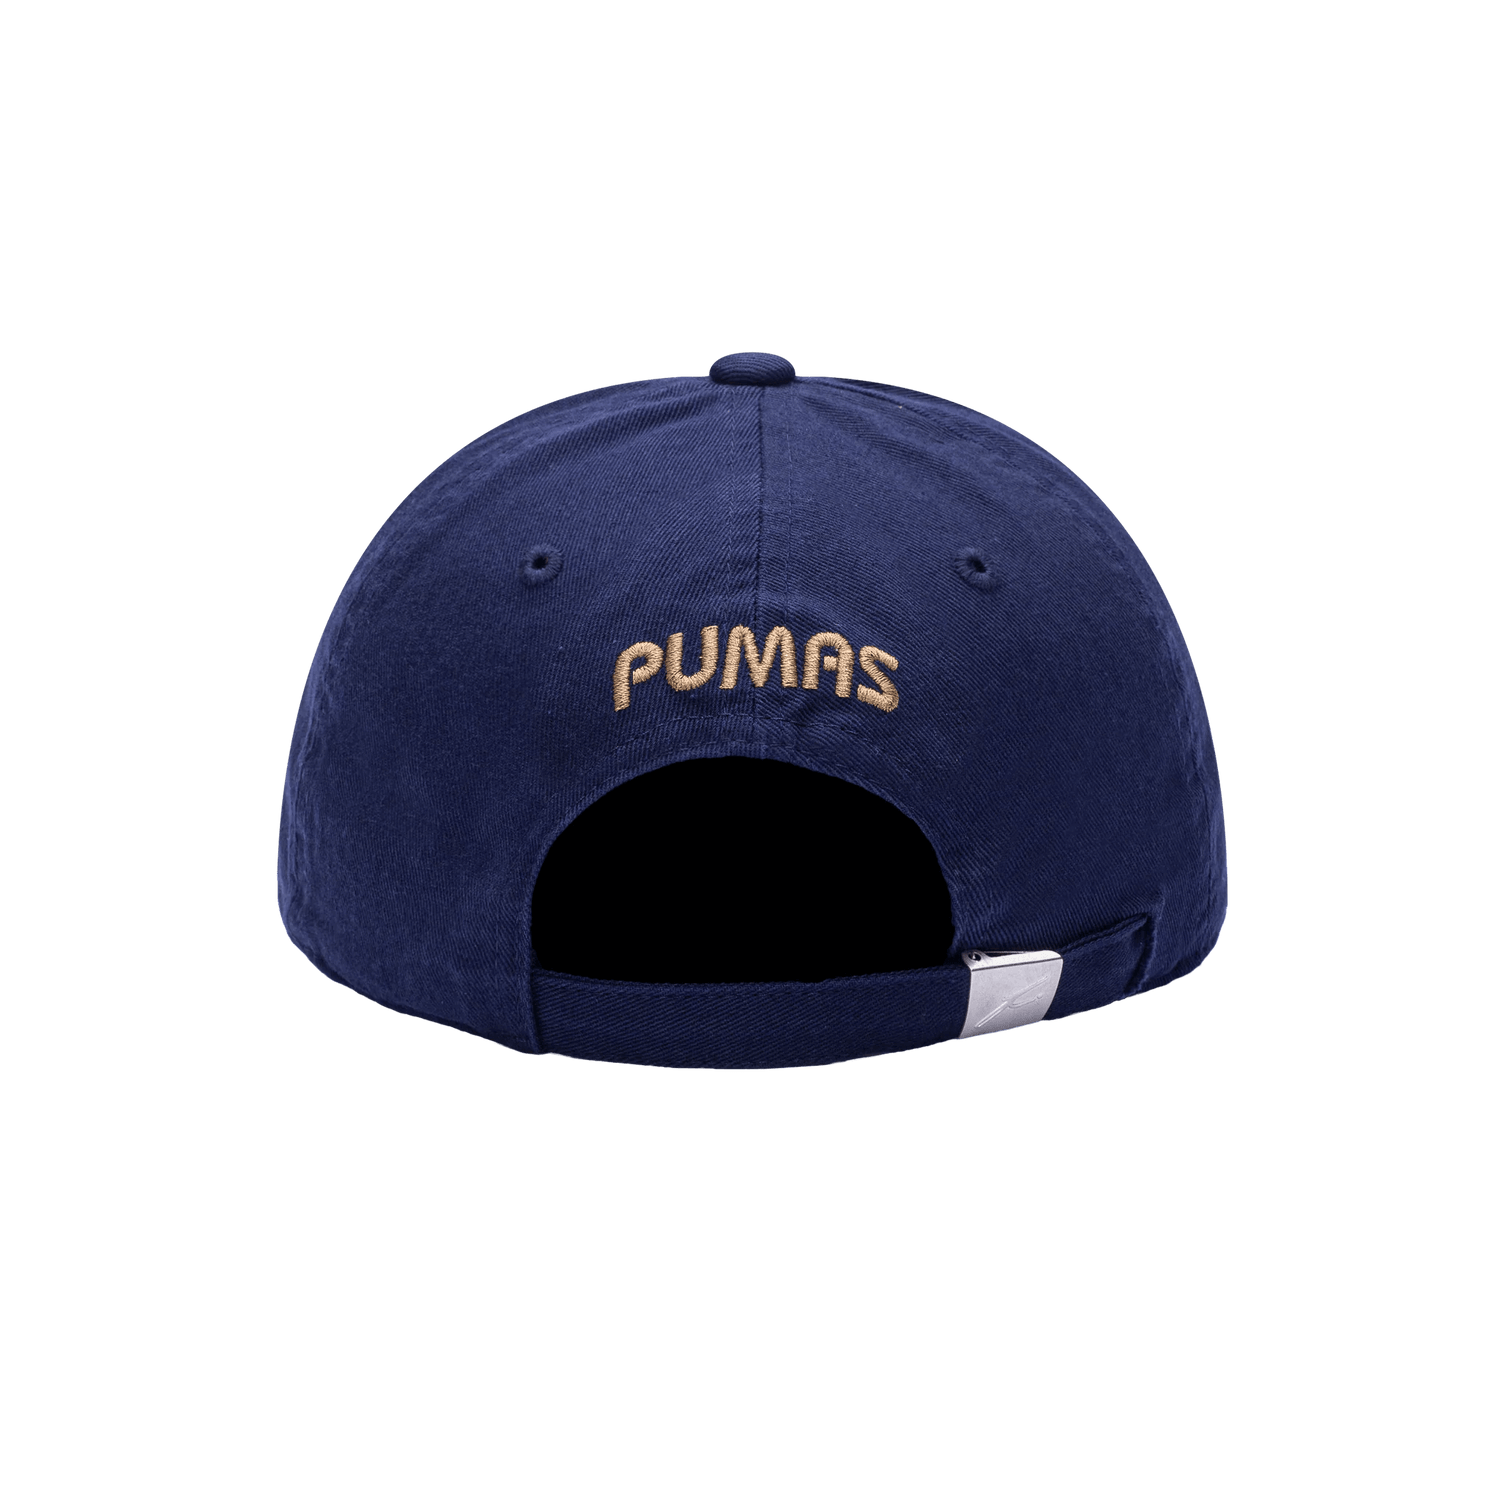 FI Collection Club Pumas Bambo Classic Hat (Back)